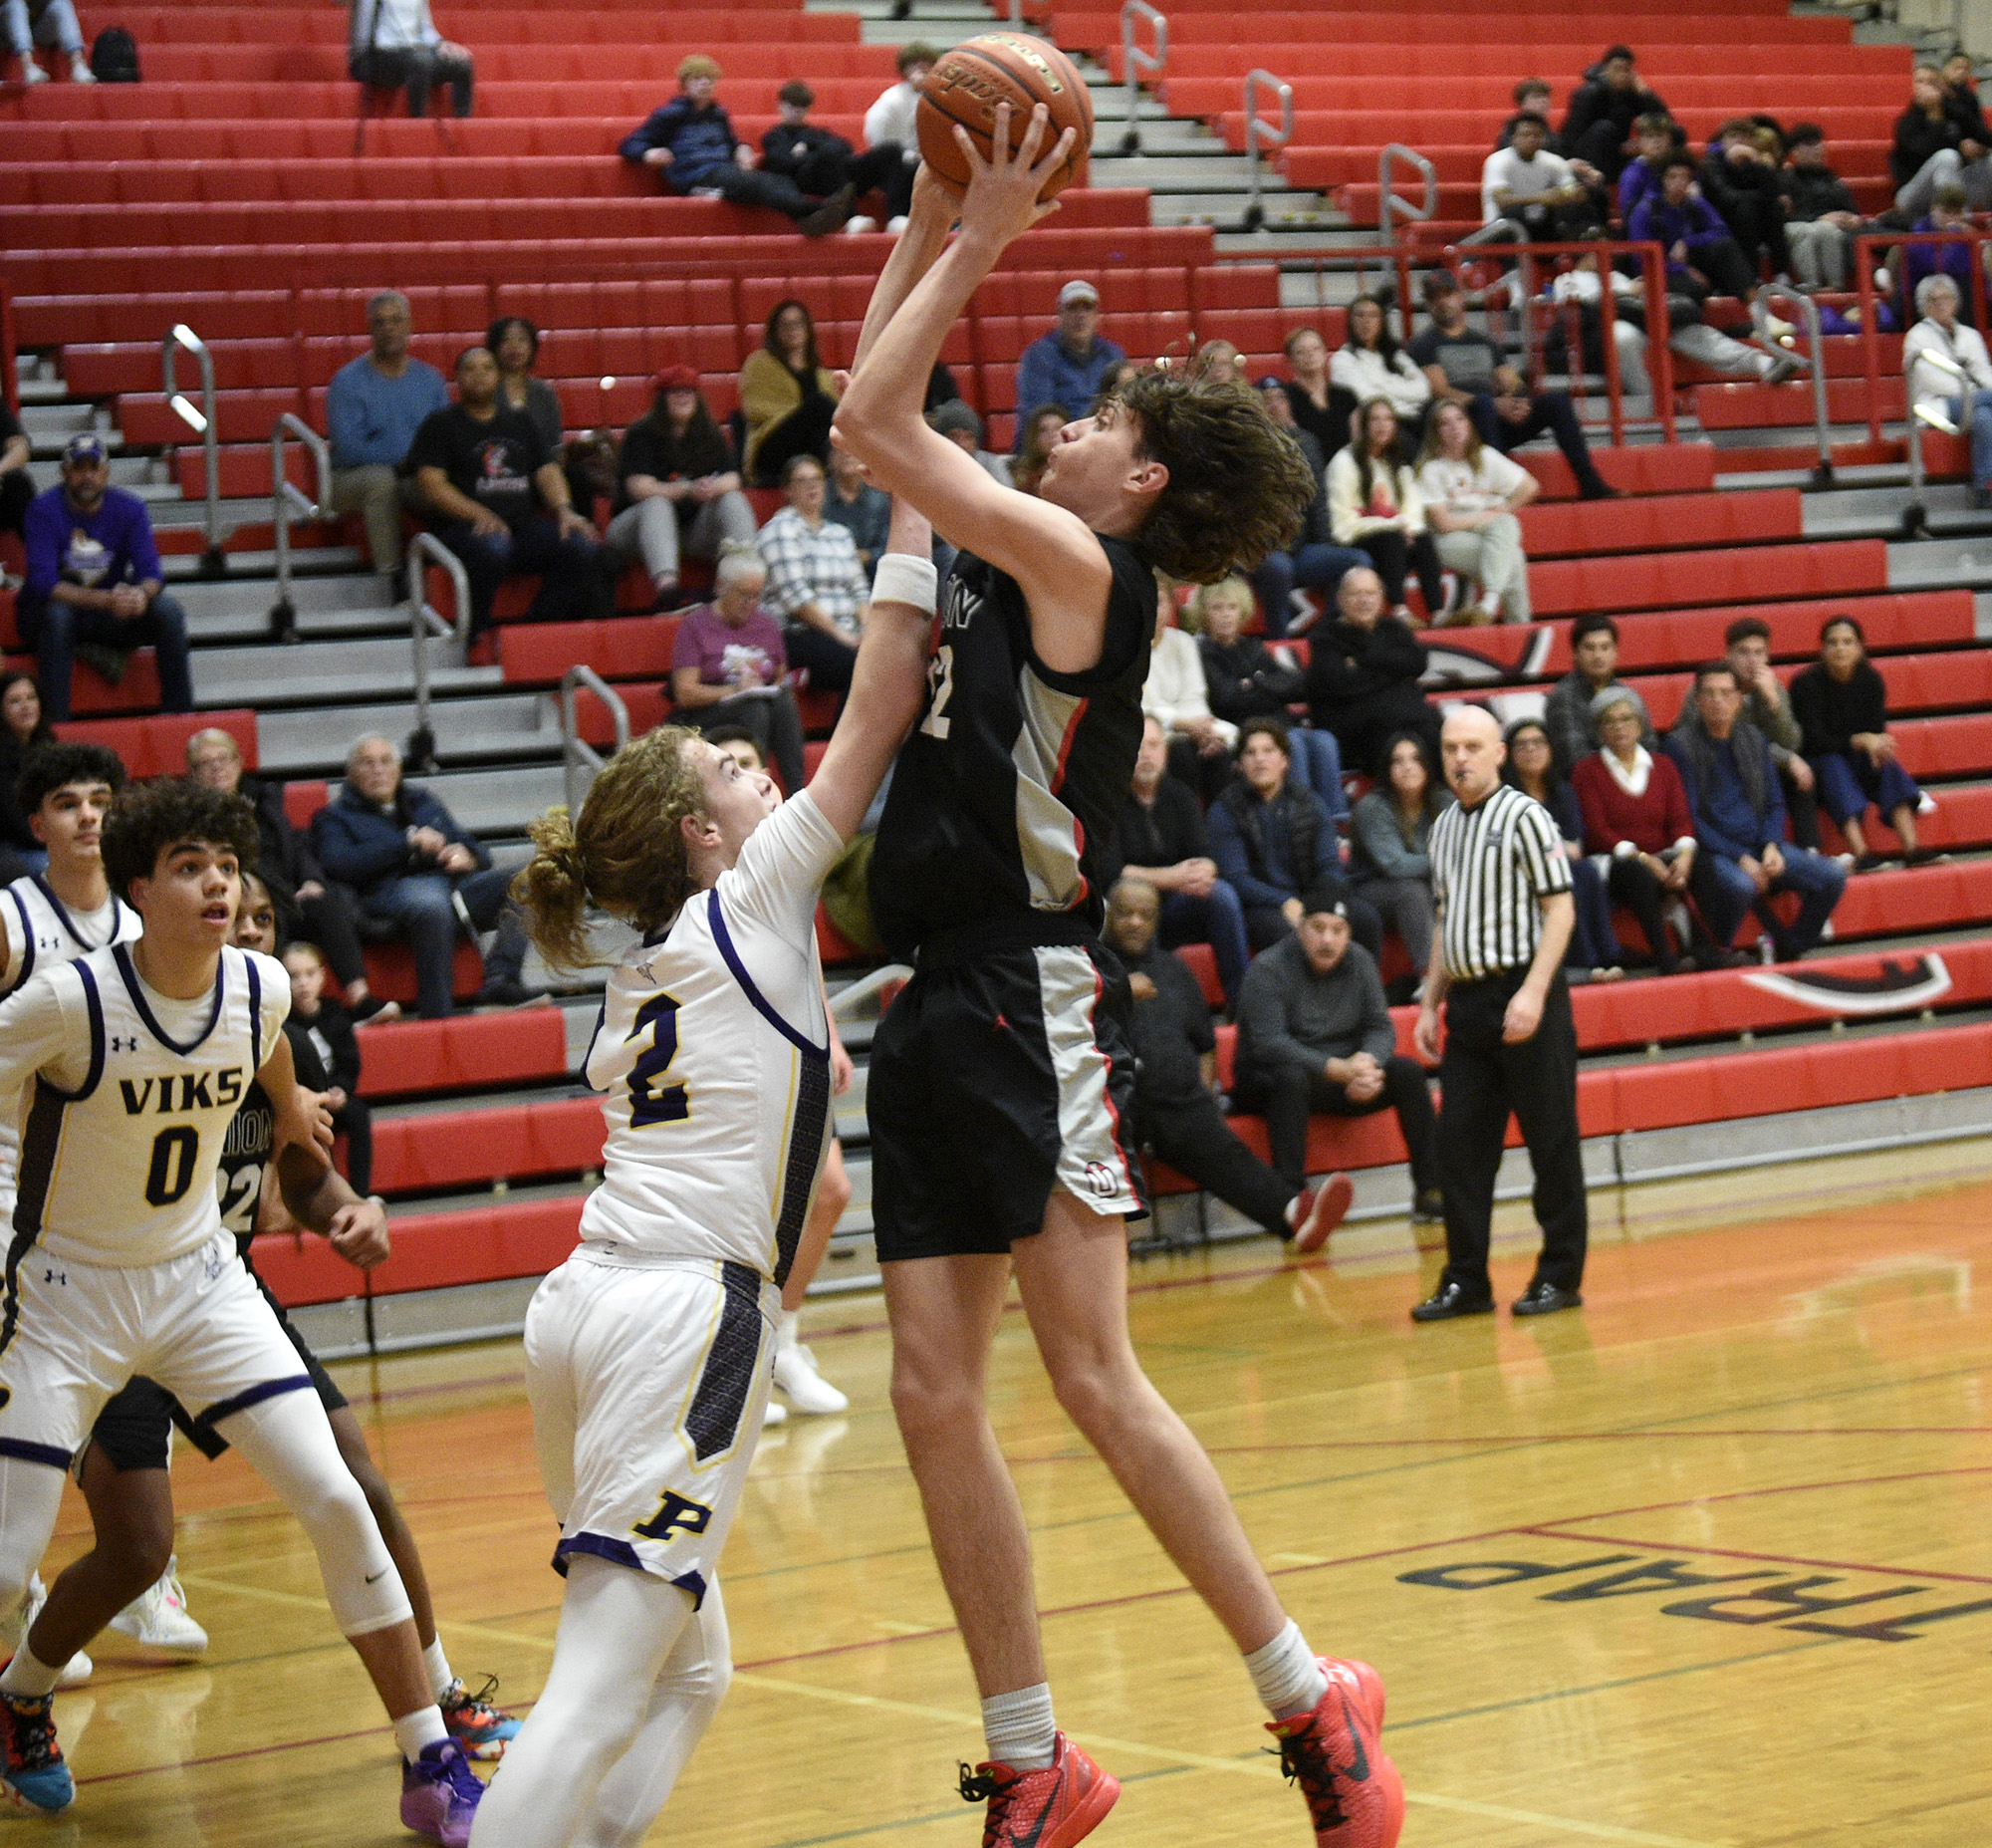 Kody Holcomb of Union takes a shot over Carson Lovett (2) of Puyallup in the Myron Lawrence Memorial Tournament at Fort Vancouver High School on Thursday, Dec. 28, 2023.